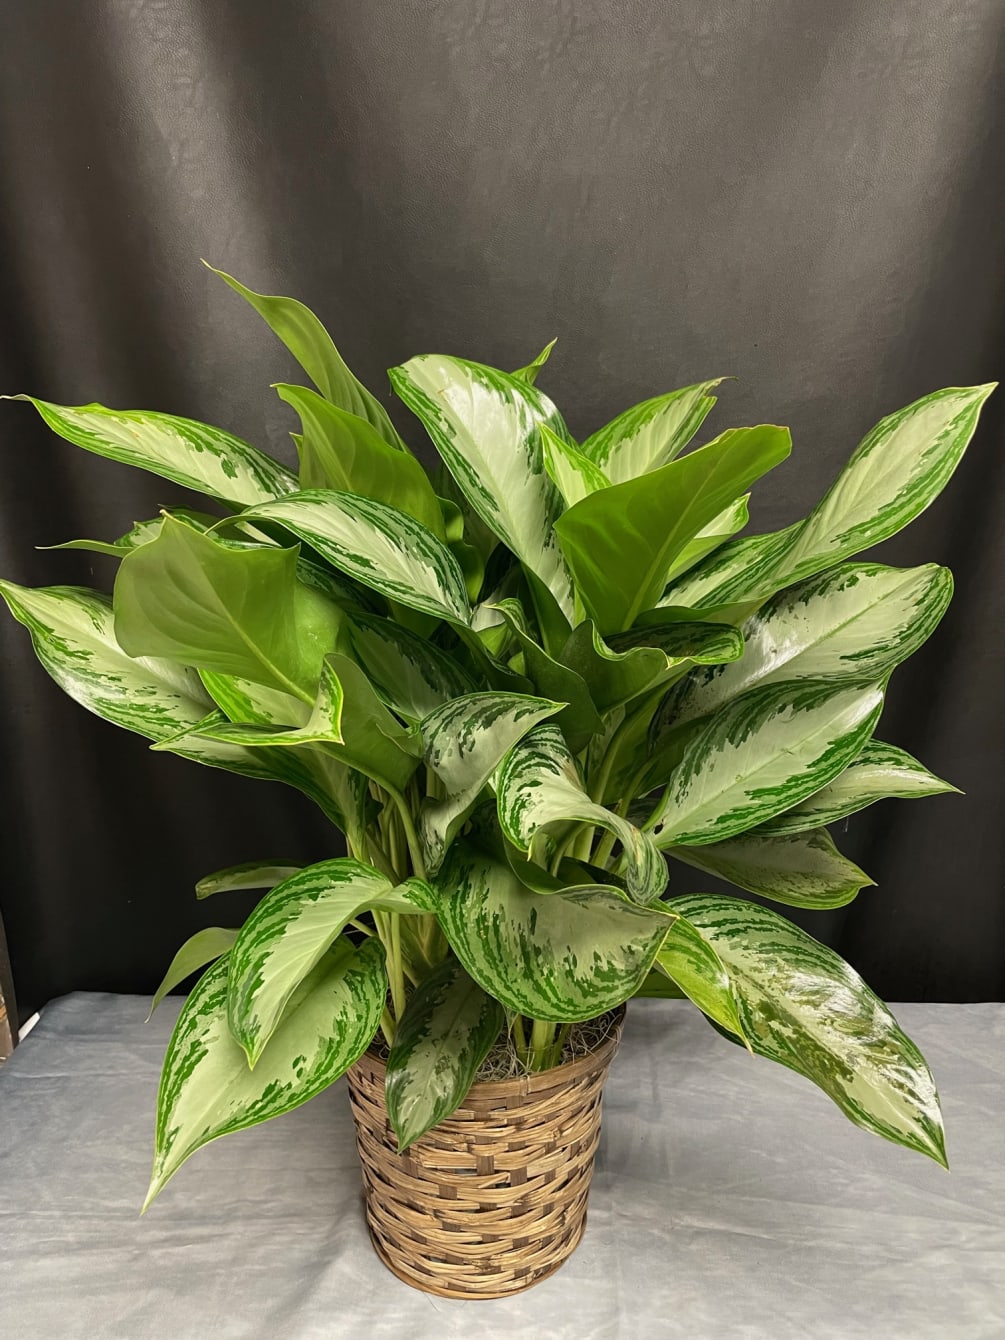 This easy-care Aglao silver bay is low-light tolerant and a plant that